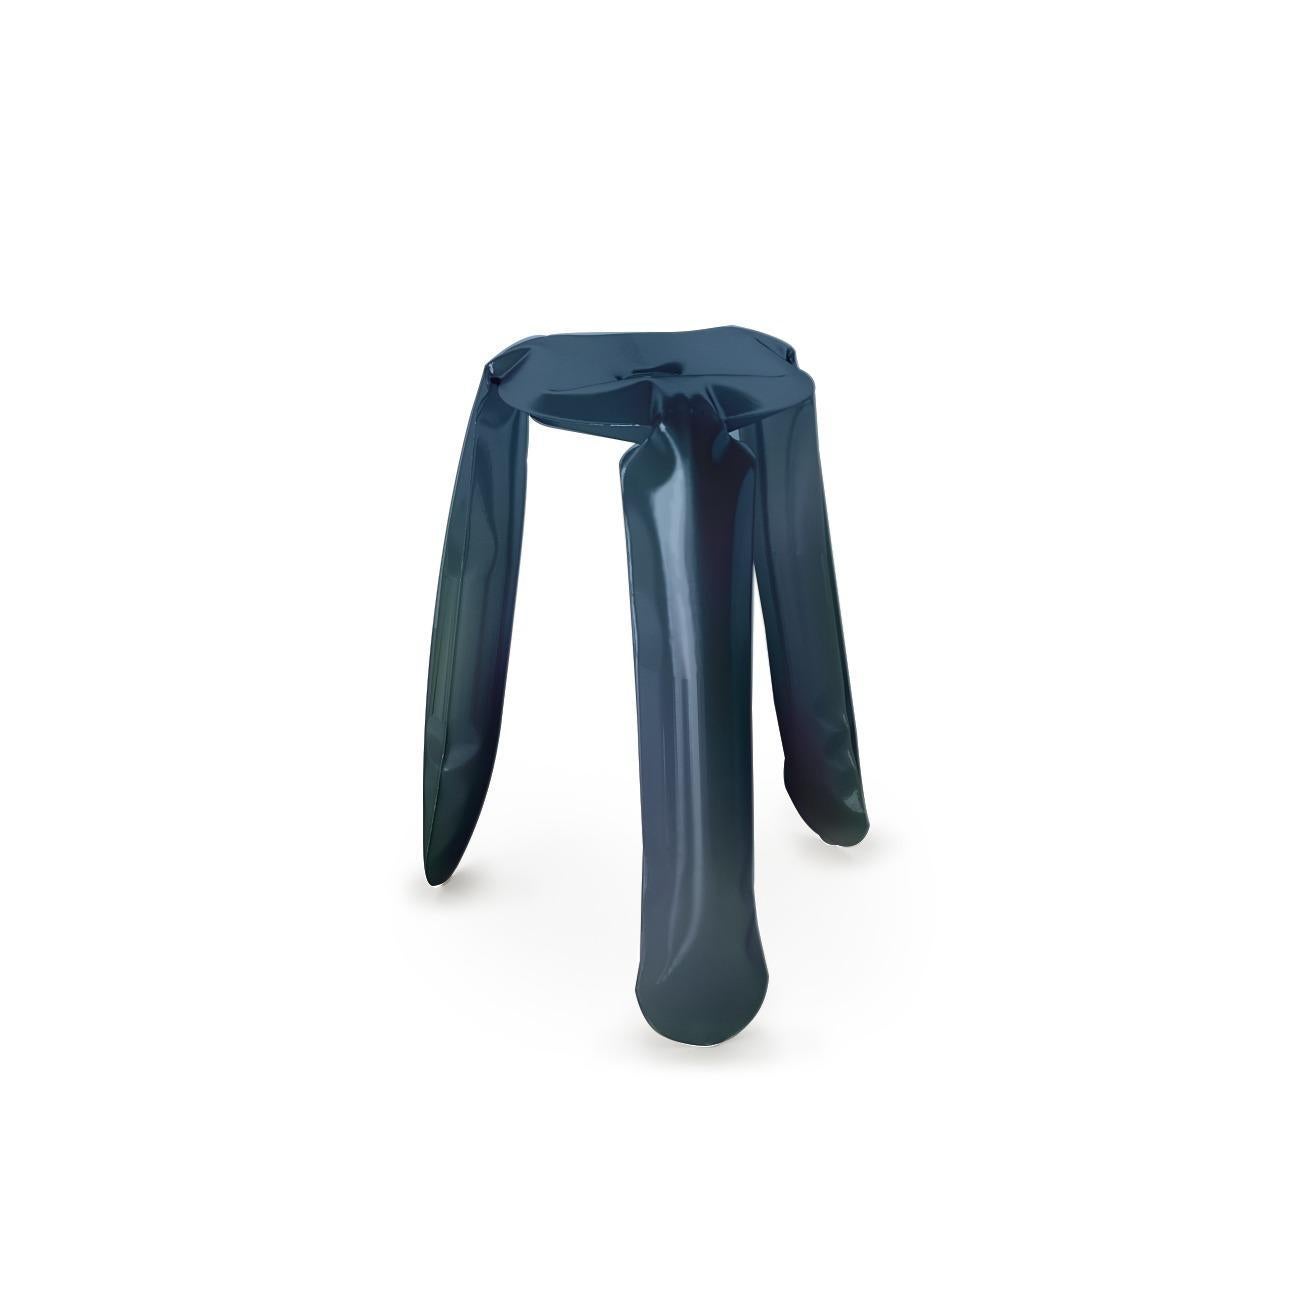 Cosmic blue kitchen Plopp stool by Zieta
Dimensions: D 35 x H 65 cm 
Material: Stainless steel, carbon steel. 
Finish: Thermal colored.
Available in colors: Beige, black, blue, graphite, moss, umbra gray, and flamed gold. Available in Stainless